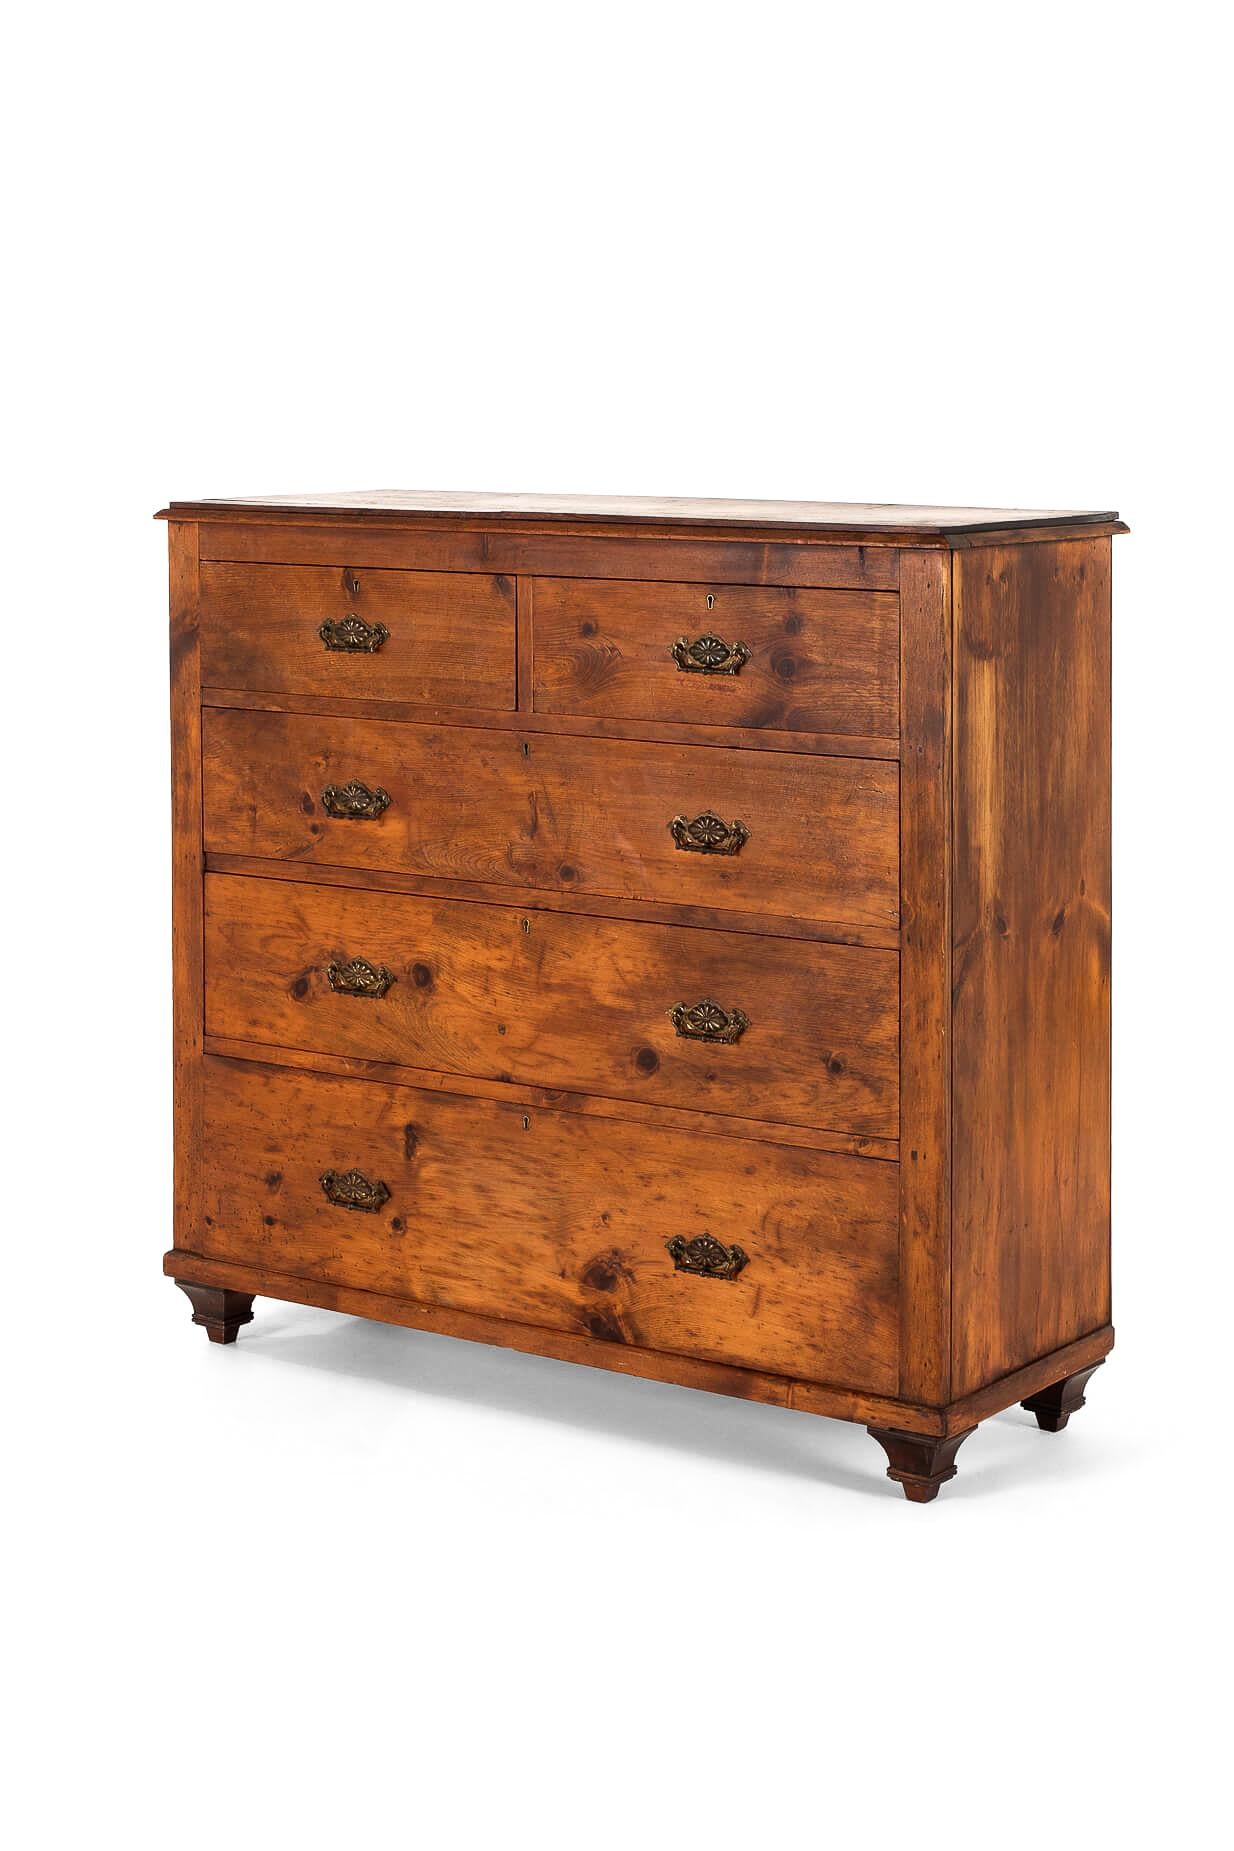 A superb large oak and pine chest of drawers, with two short over three long drawers.

Original brass hoop handles to each drawer all raised upon turned bun feet.

In untouched condition with a beautiful faded finish to the rich chestnut oak.

North